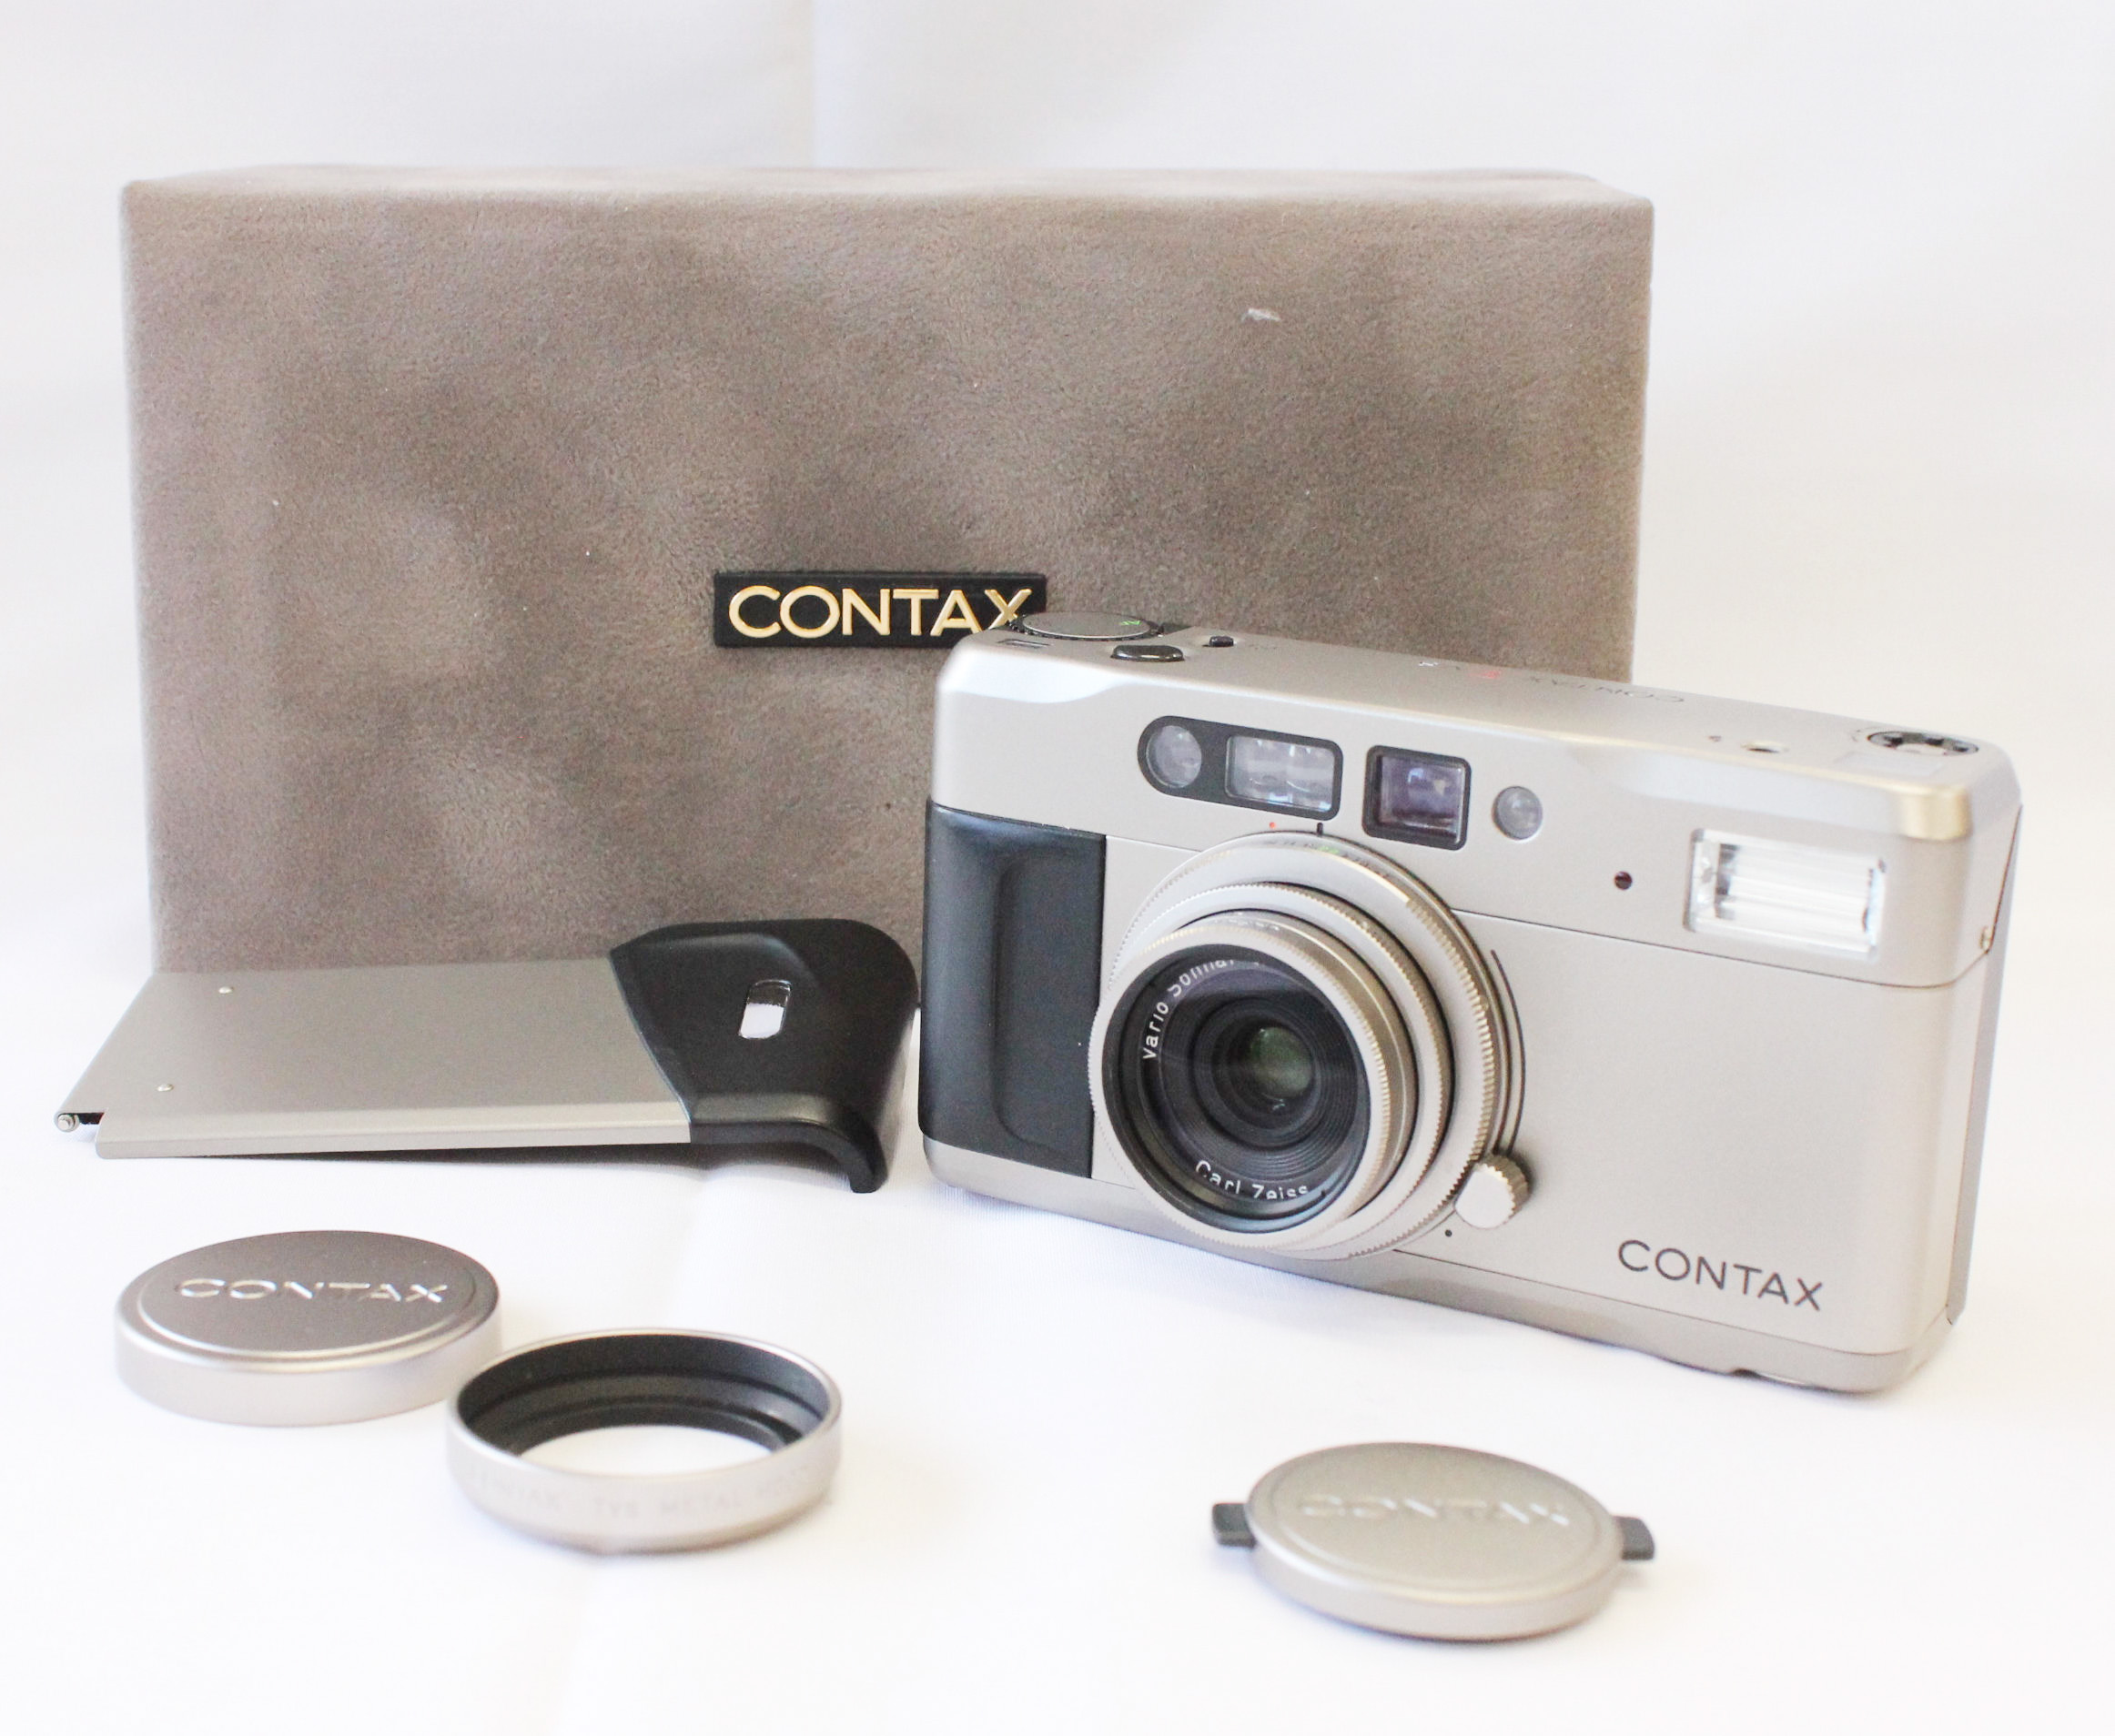  Contax TVS 35mm Point & Shoot Film Camera w/ Data Back from Japan Photo 0